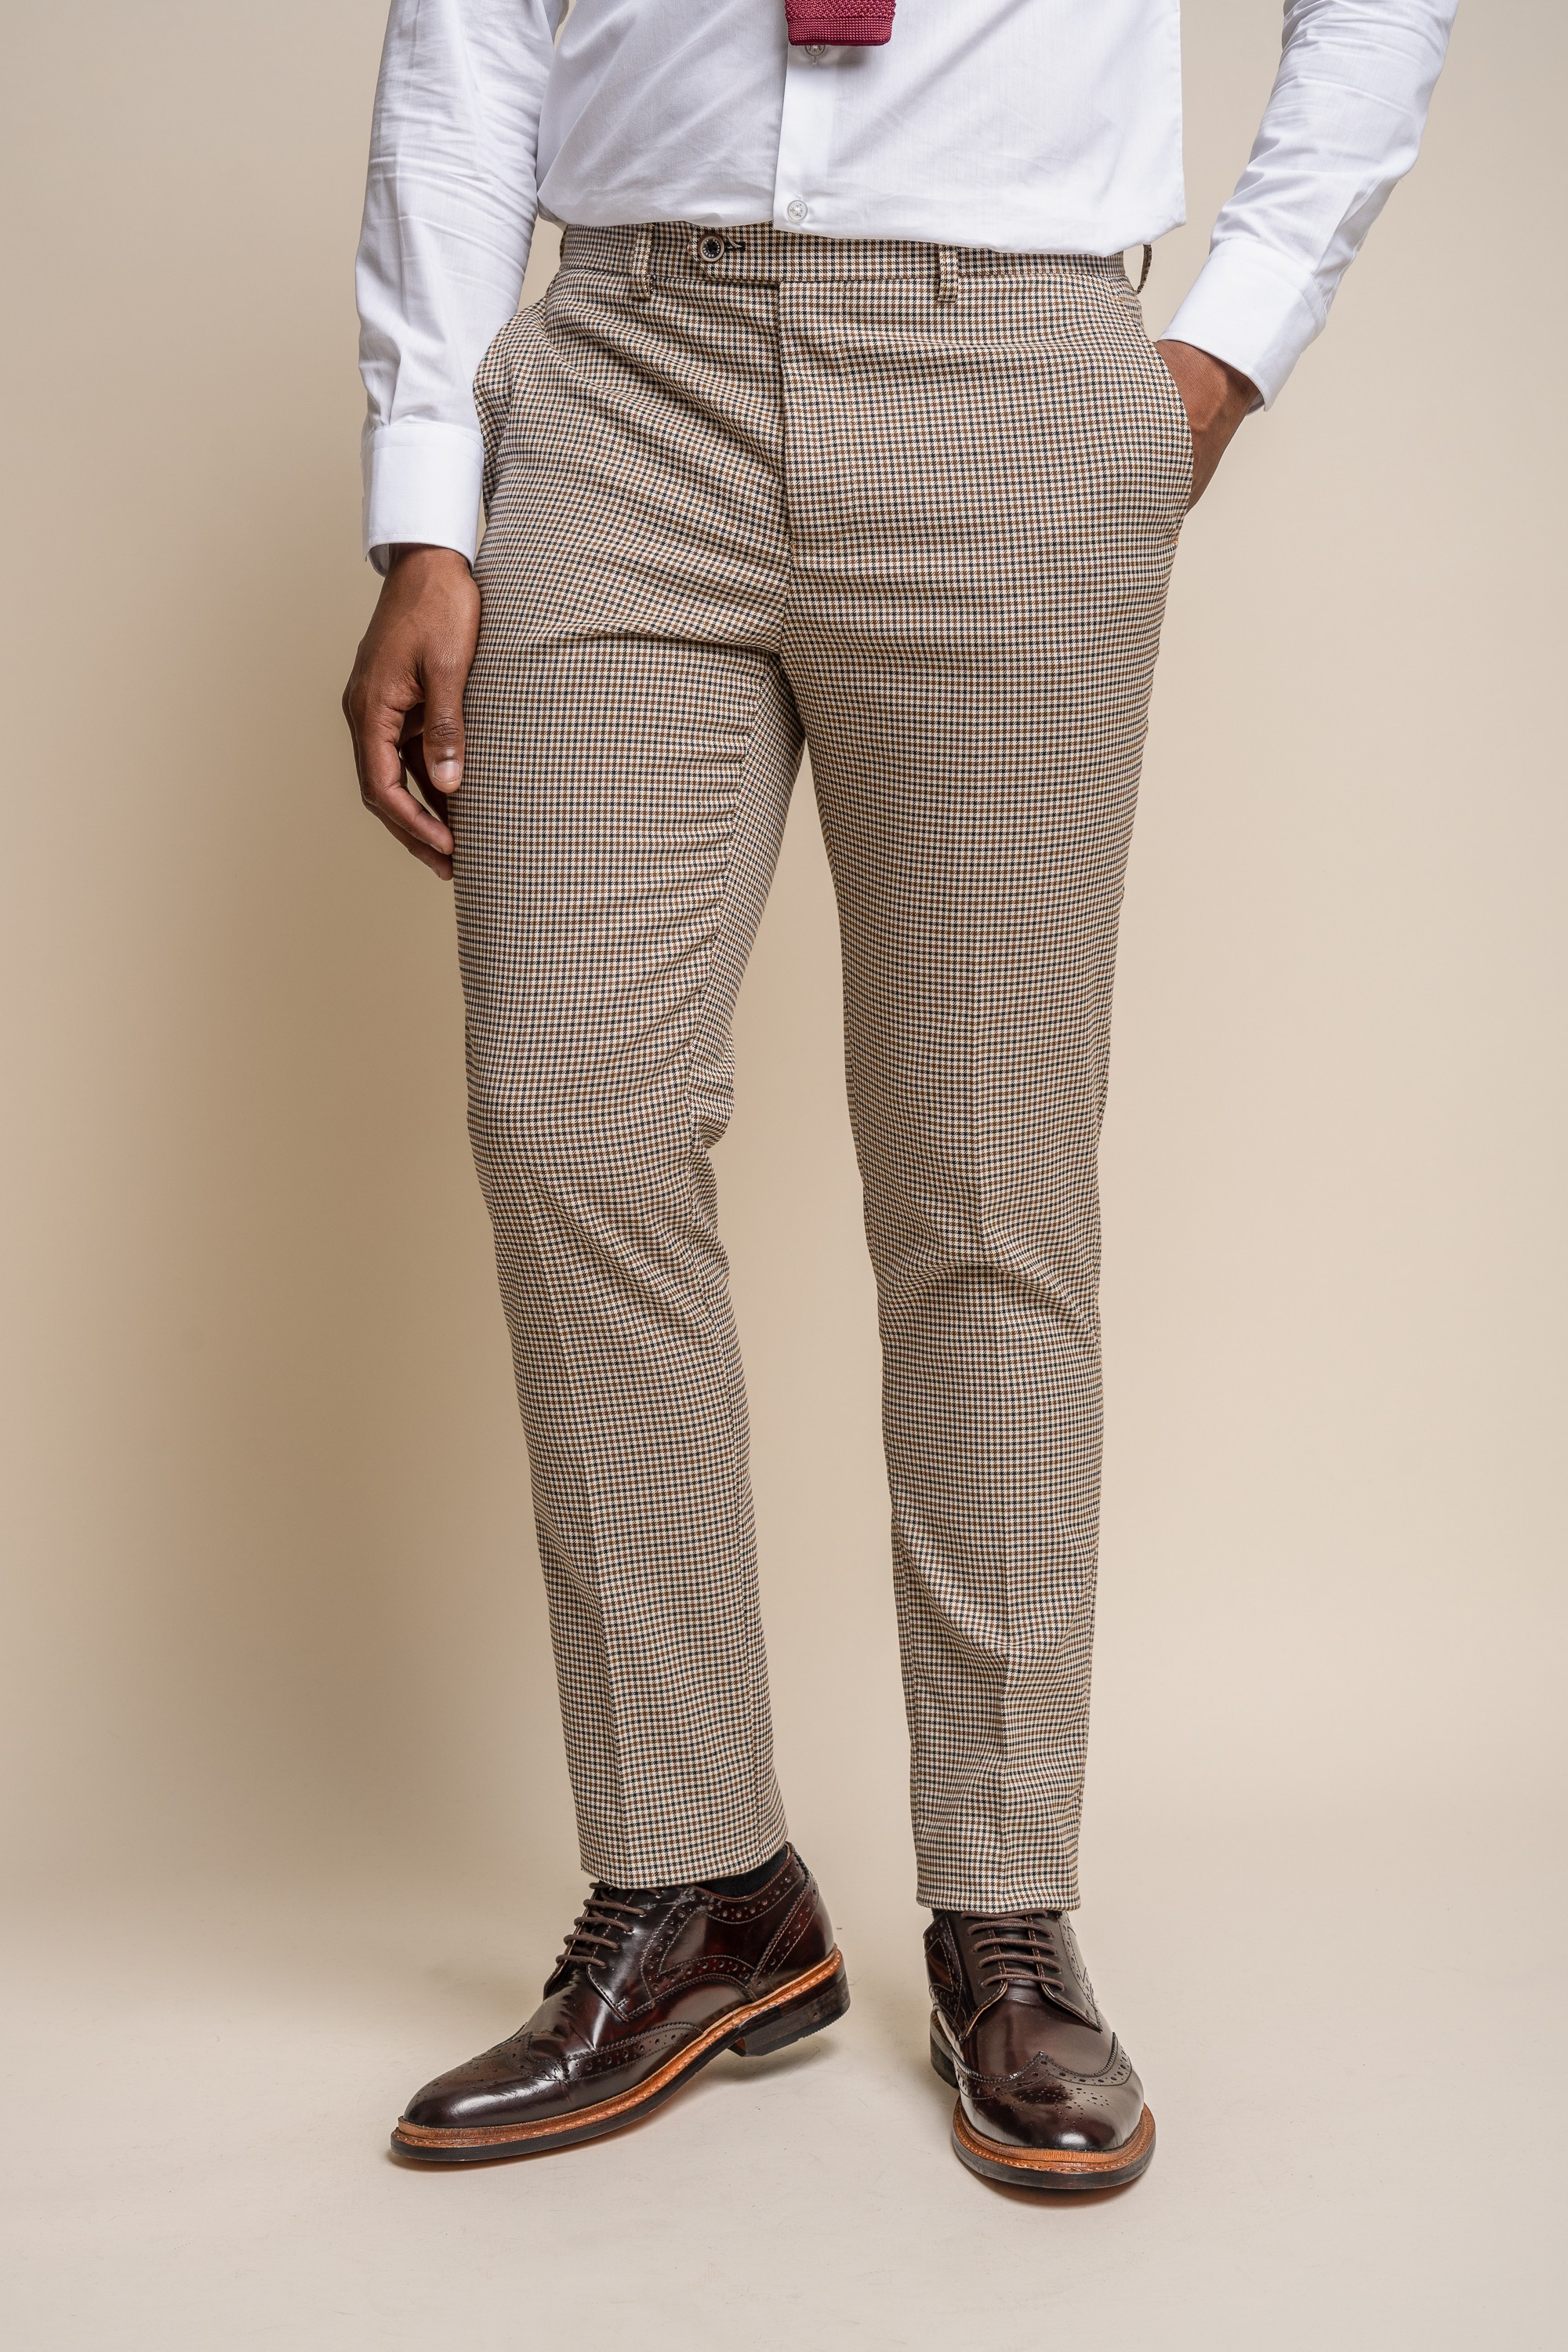 Men's Houndstooth Check Skinny Fit Trousers - ELWOOD